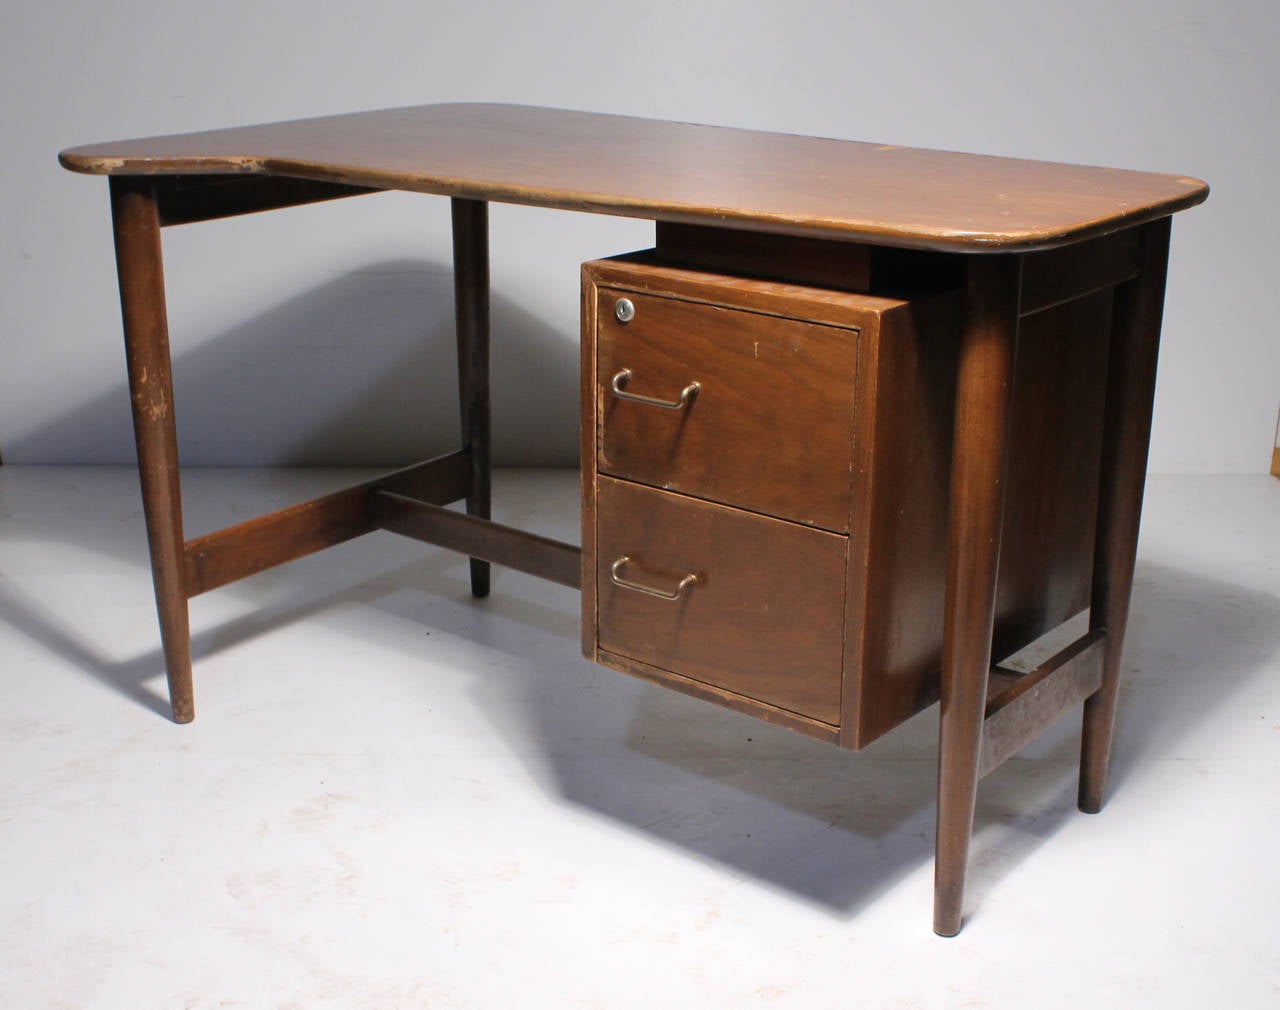 20th Century American of Martinsville Desk by Merton Gershun Desk from the 